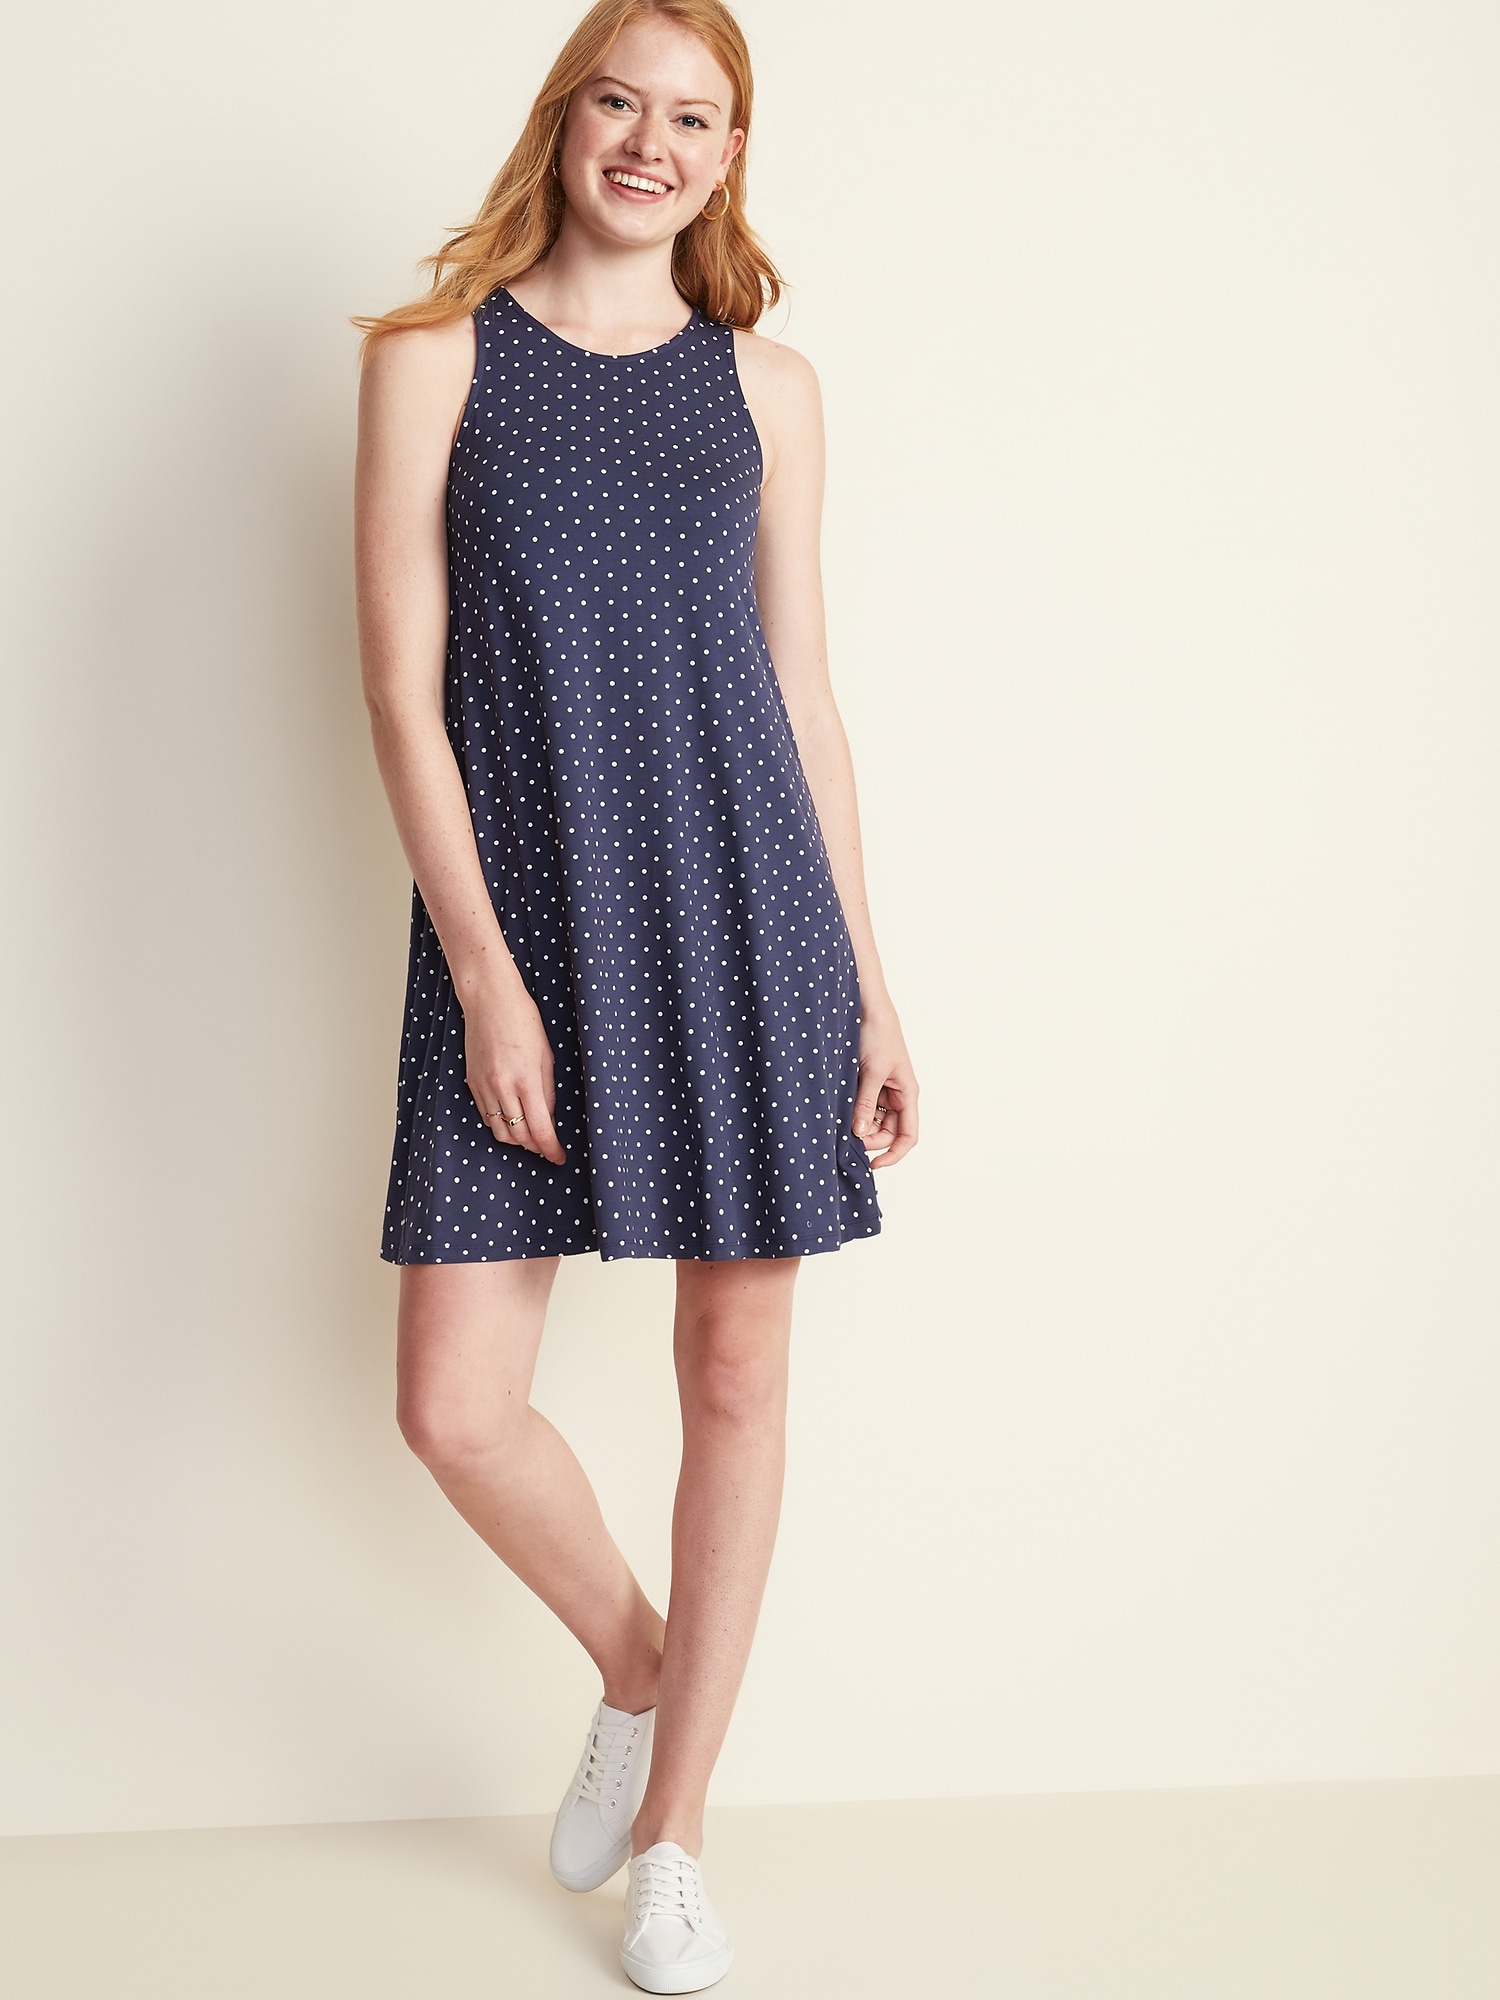 old navy womens dresses clearance